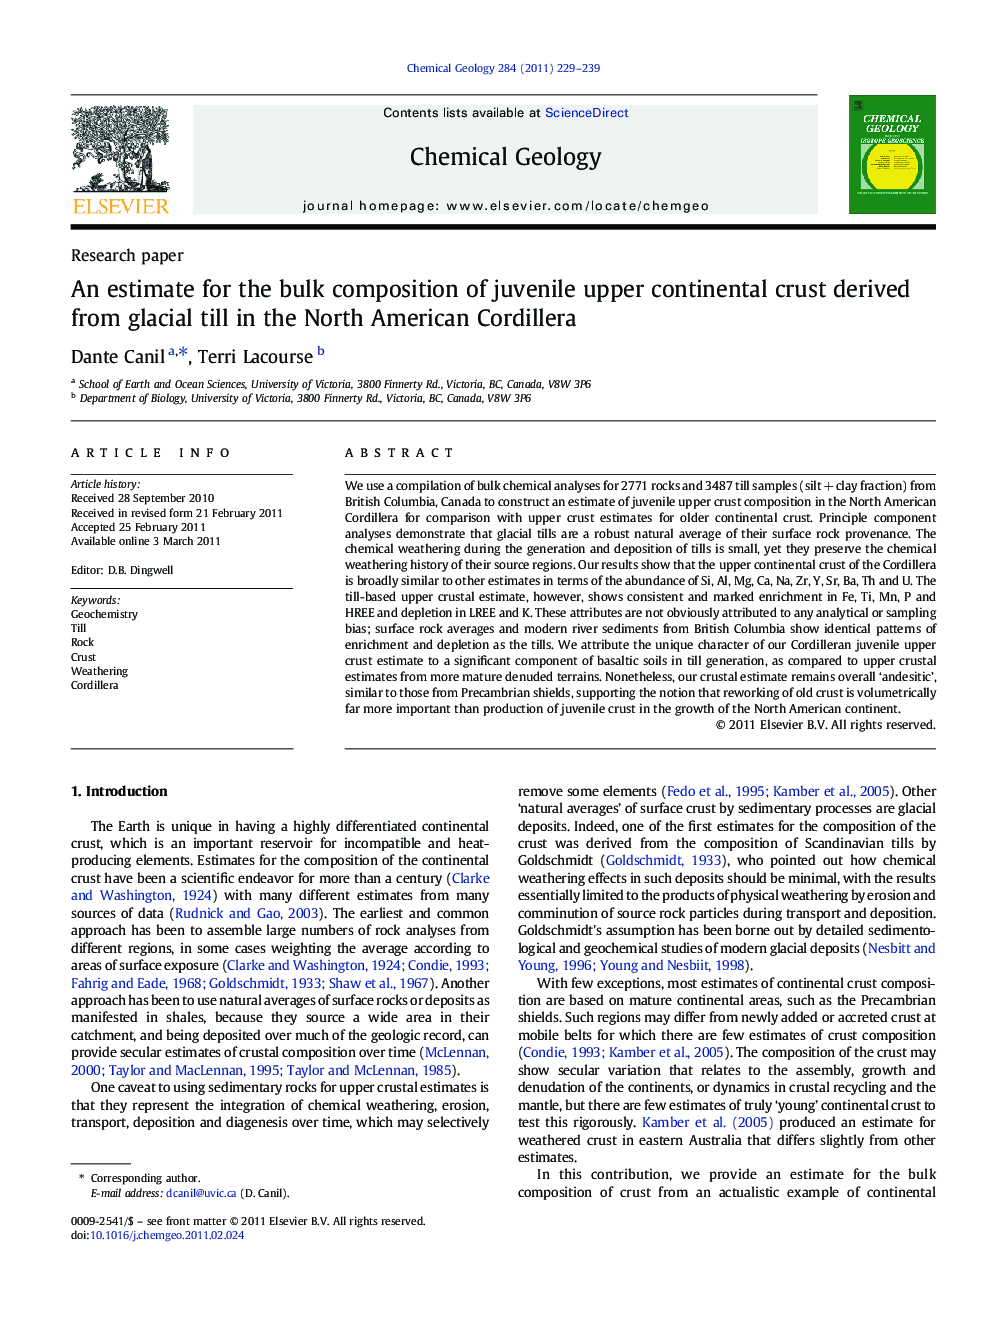 An estimate for the bulk composition of juvenile upper continental crust derived from glacial till in the North American Cordillera